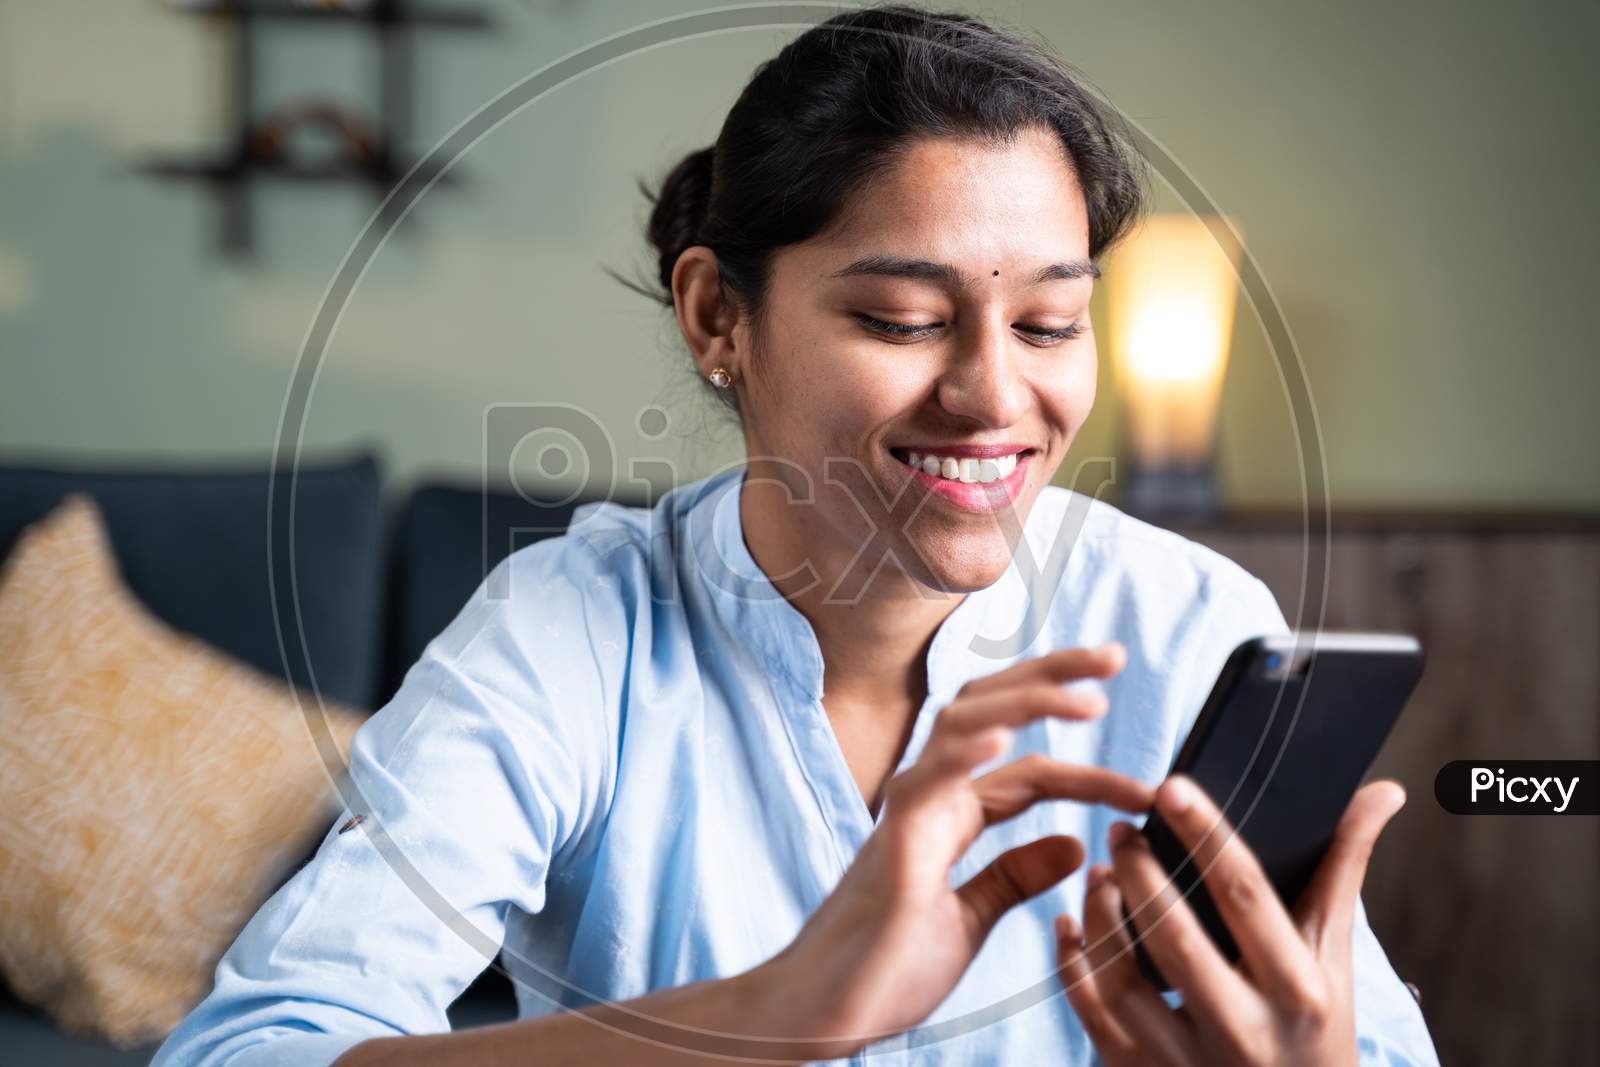 Happy Young Girl Smiling By Reading Funny Message Or Sms On Smartphone - Concept Of Using Social Media, Online Messaging App, Internet And Entertainment Lifestyle